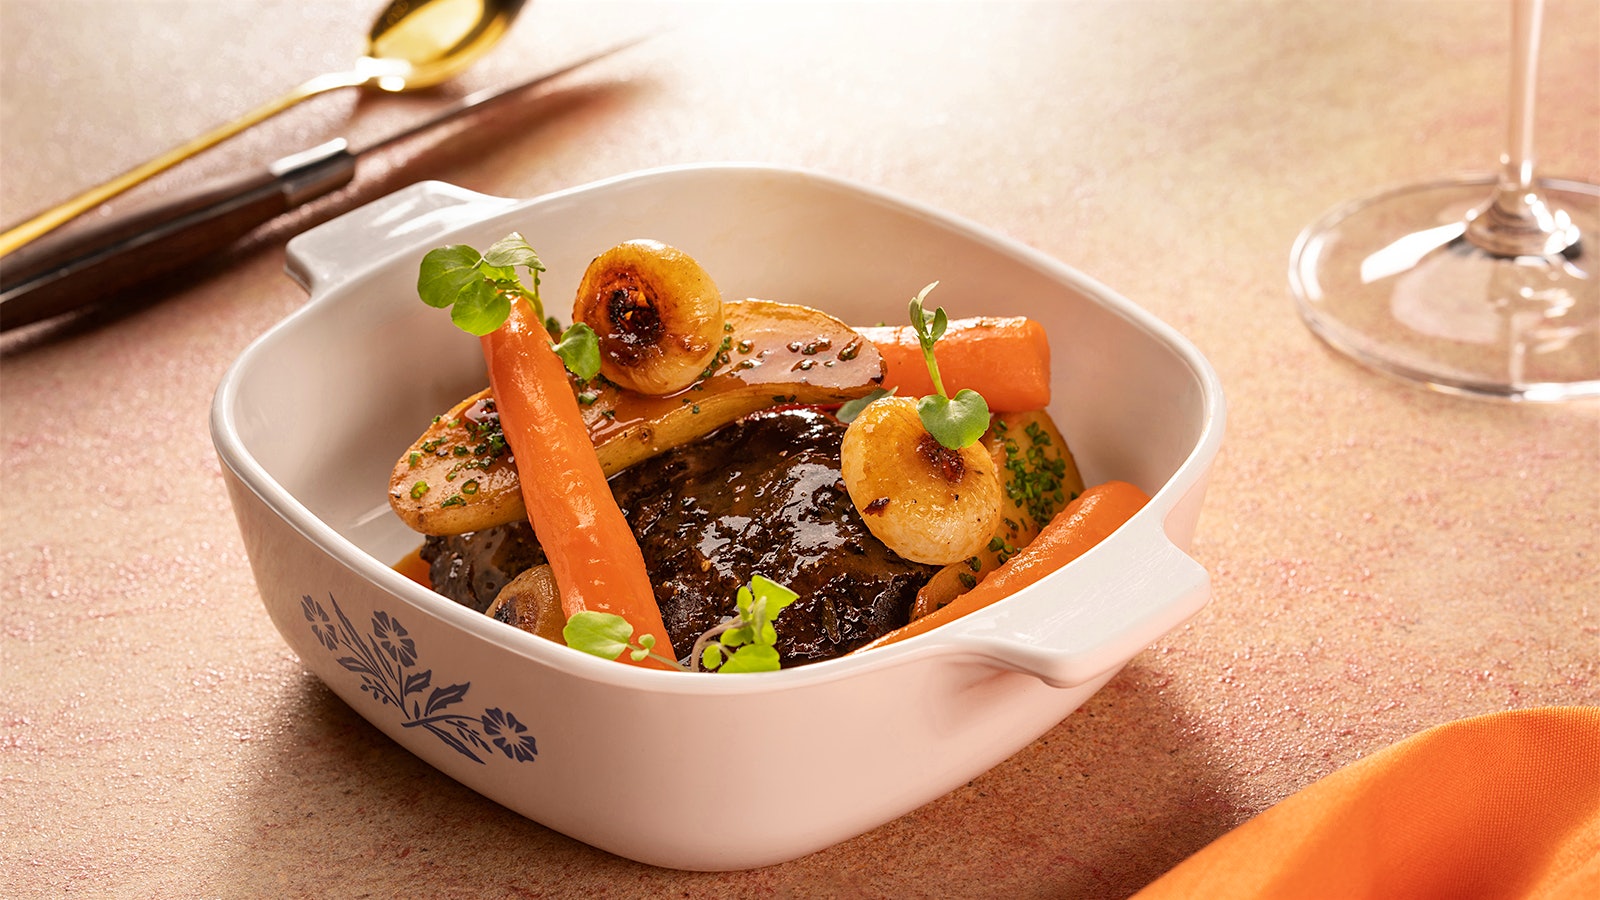  A Corningware blue cornflower casserole dish holding the Retro by Voltaggio version of pot roast with wagyu beef checks, glazed carrots and fingerling potatoes